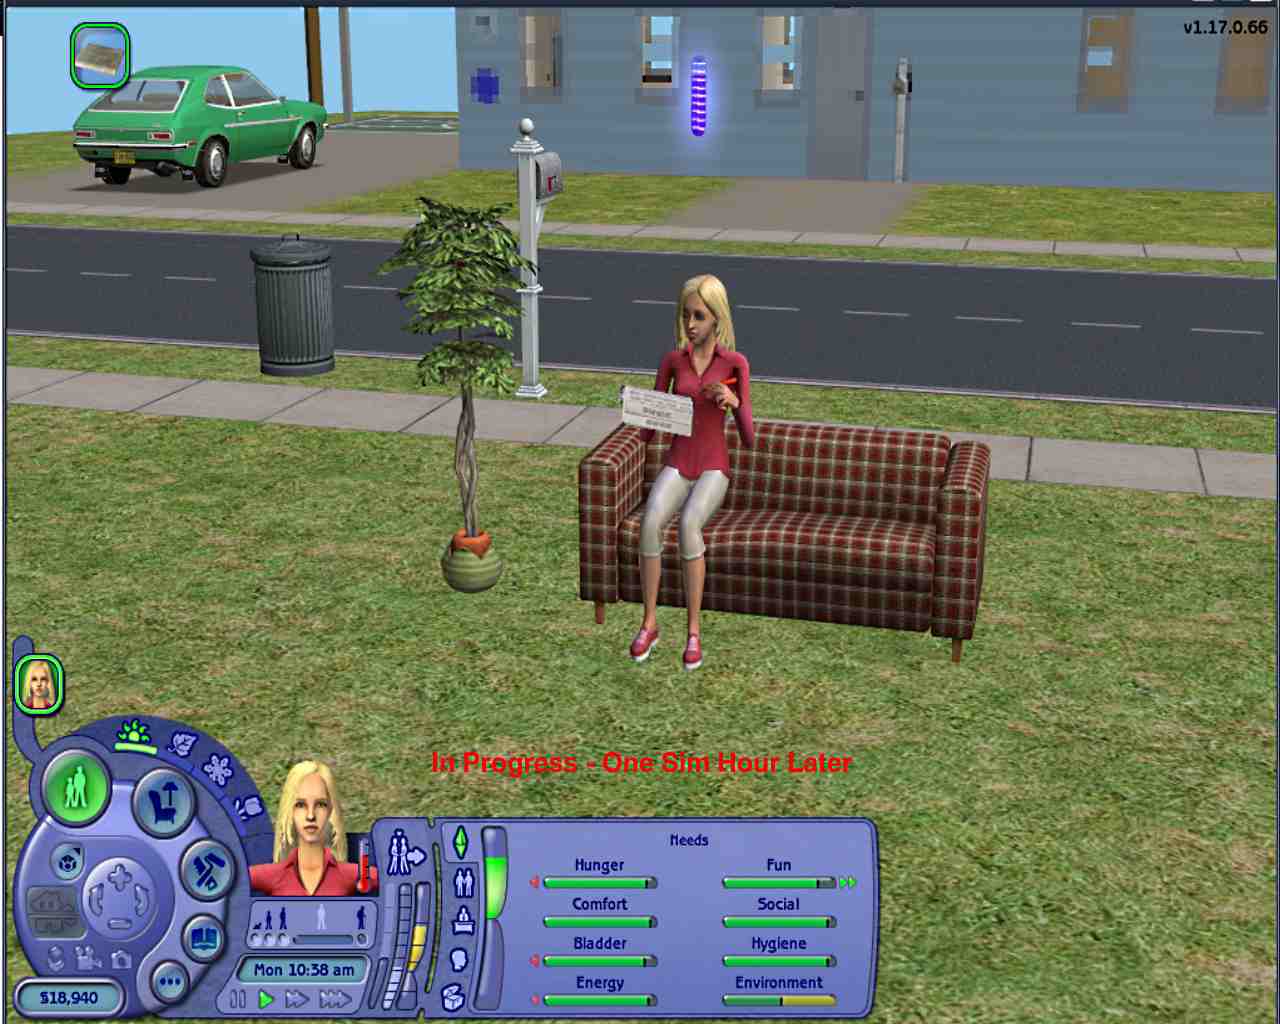 Sims 2, The Download (2004 Strategy Game)